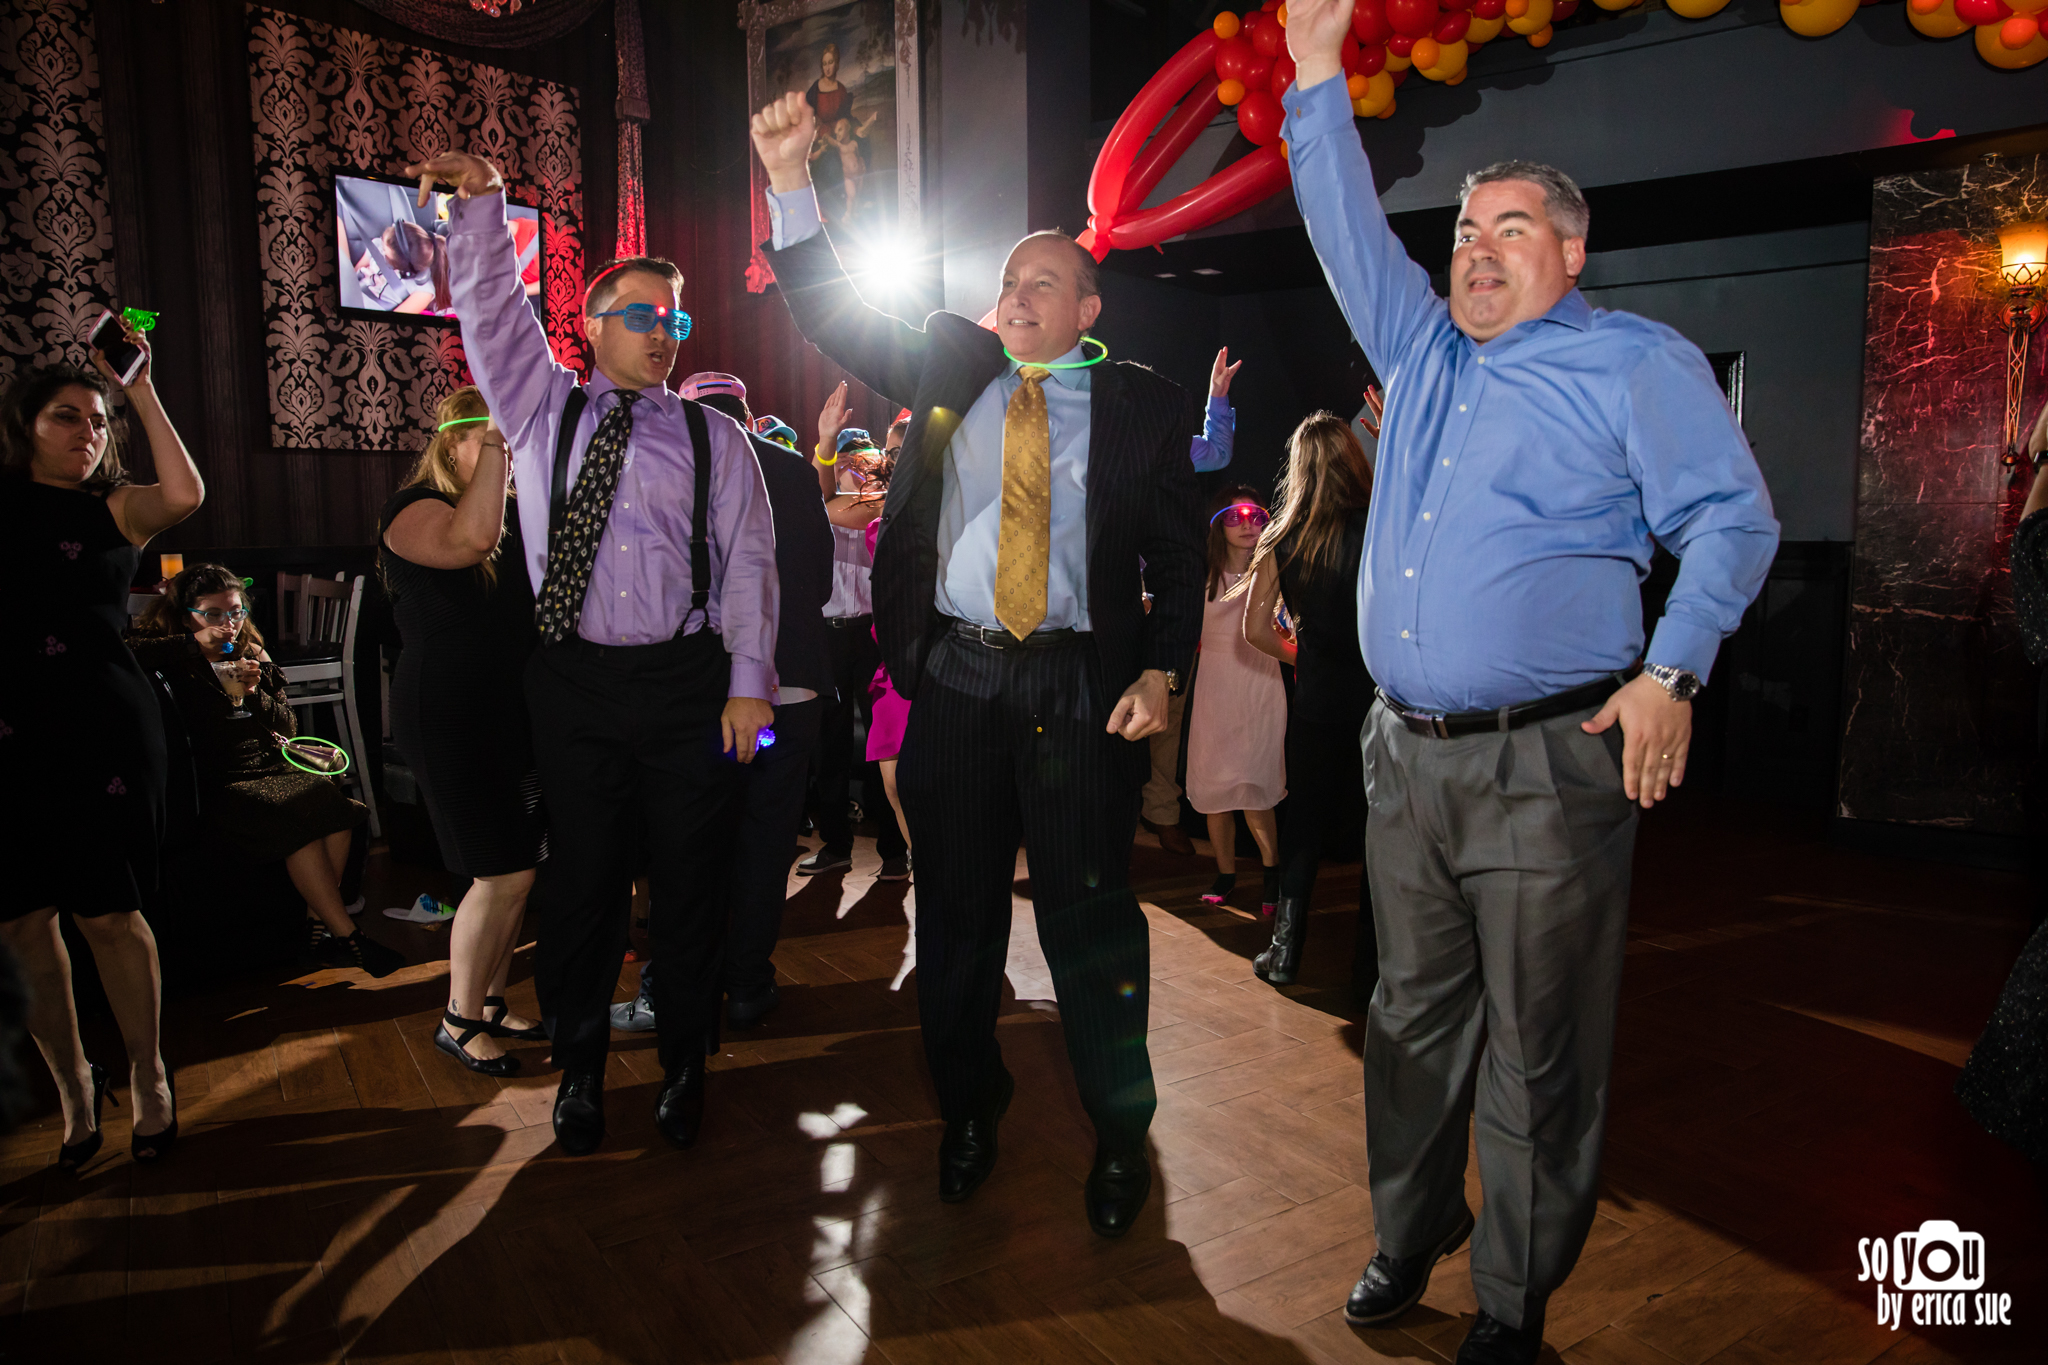 so-you-by-erica-sue-bar-bat-mitzvah-photography-temple-beth-orr-coral-springs-fl-7845.jpg